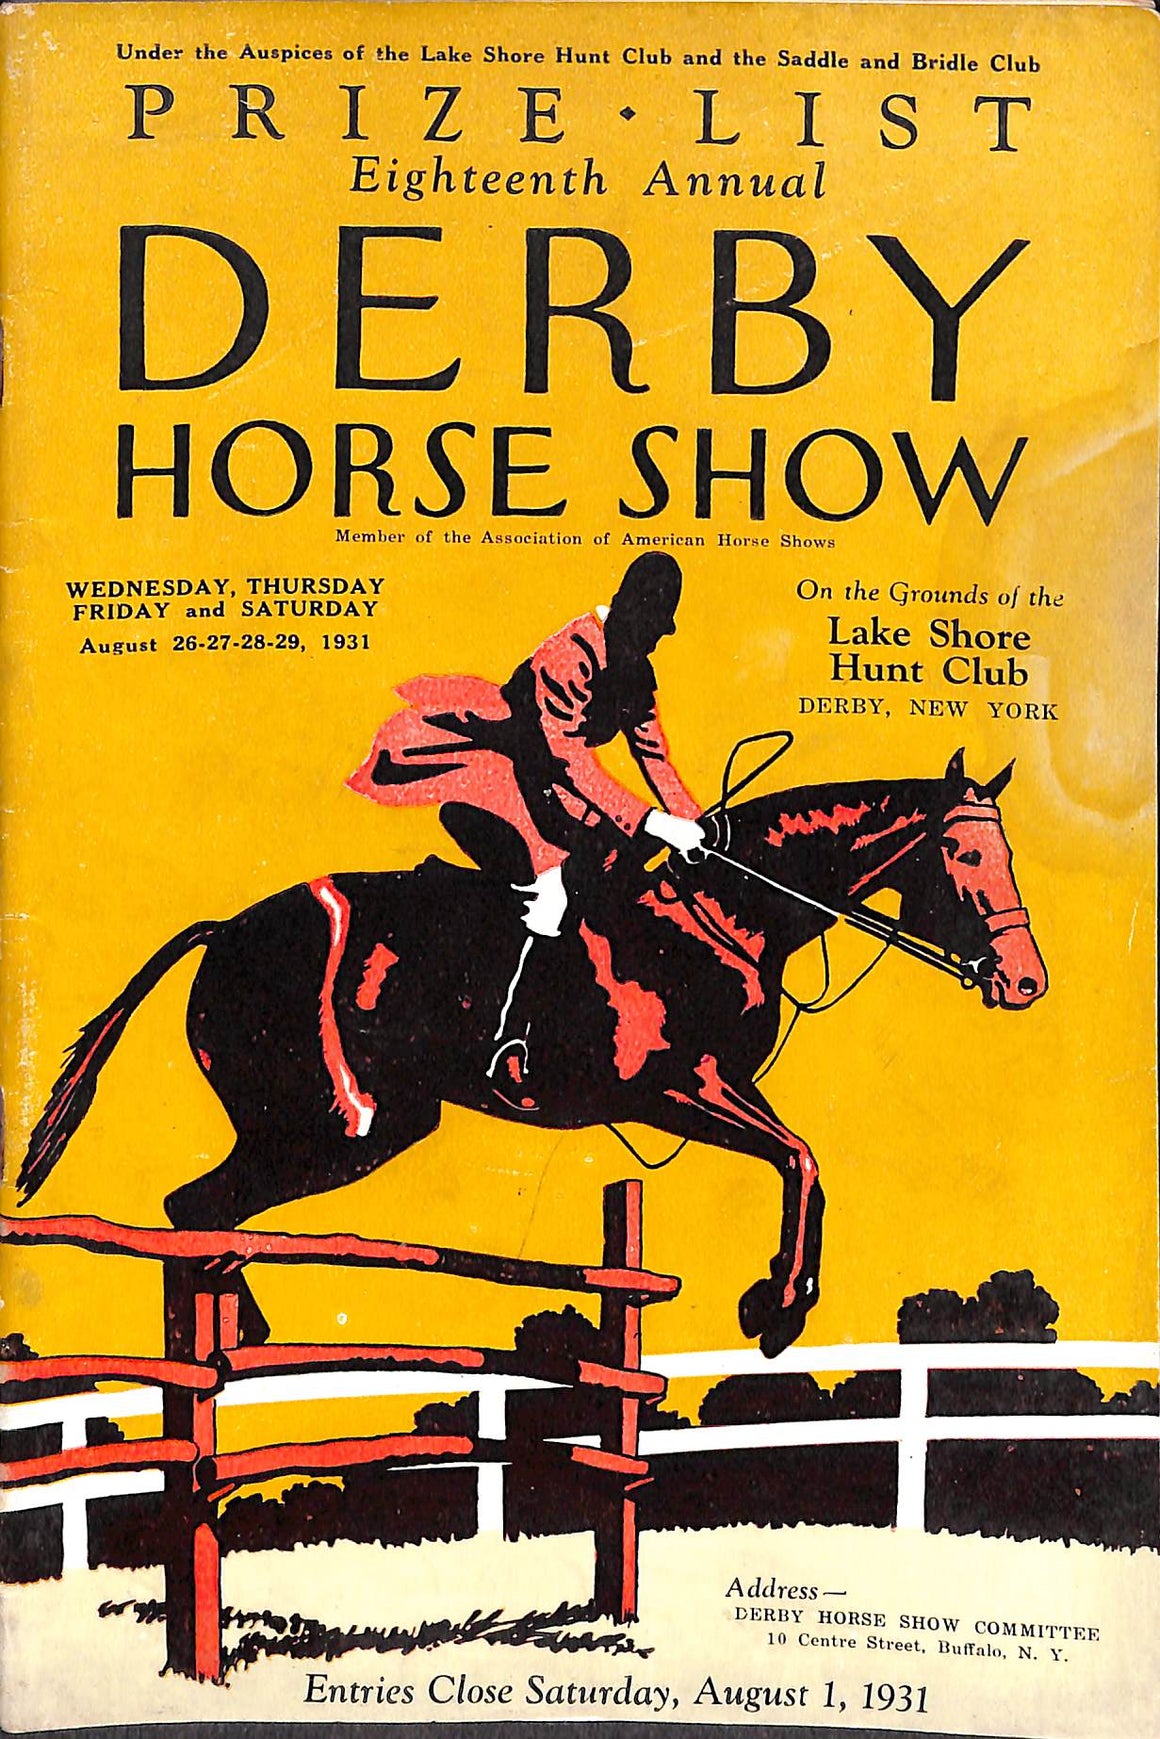 "Eighteenth Annual Derby, NY Horse Show" 1931